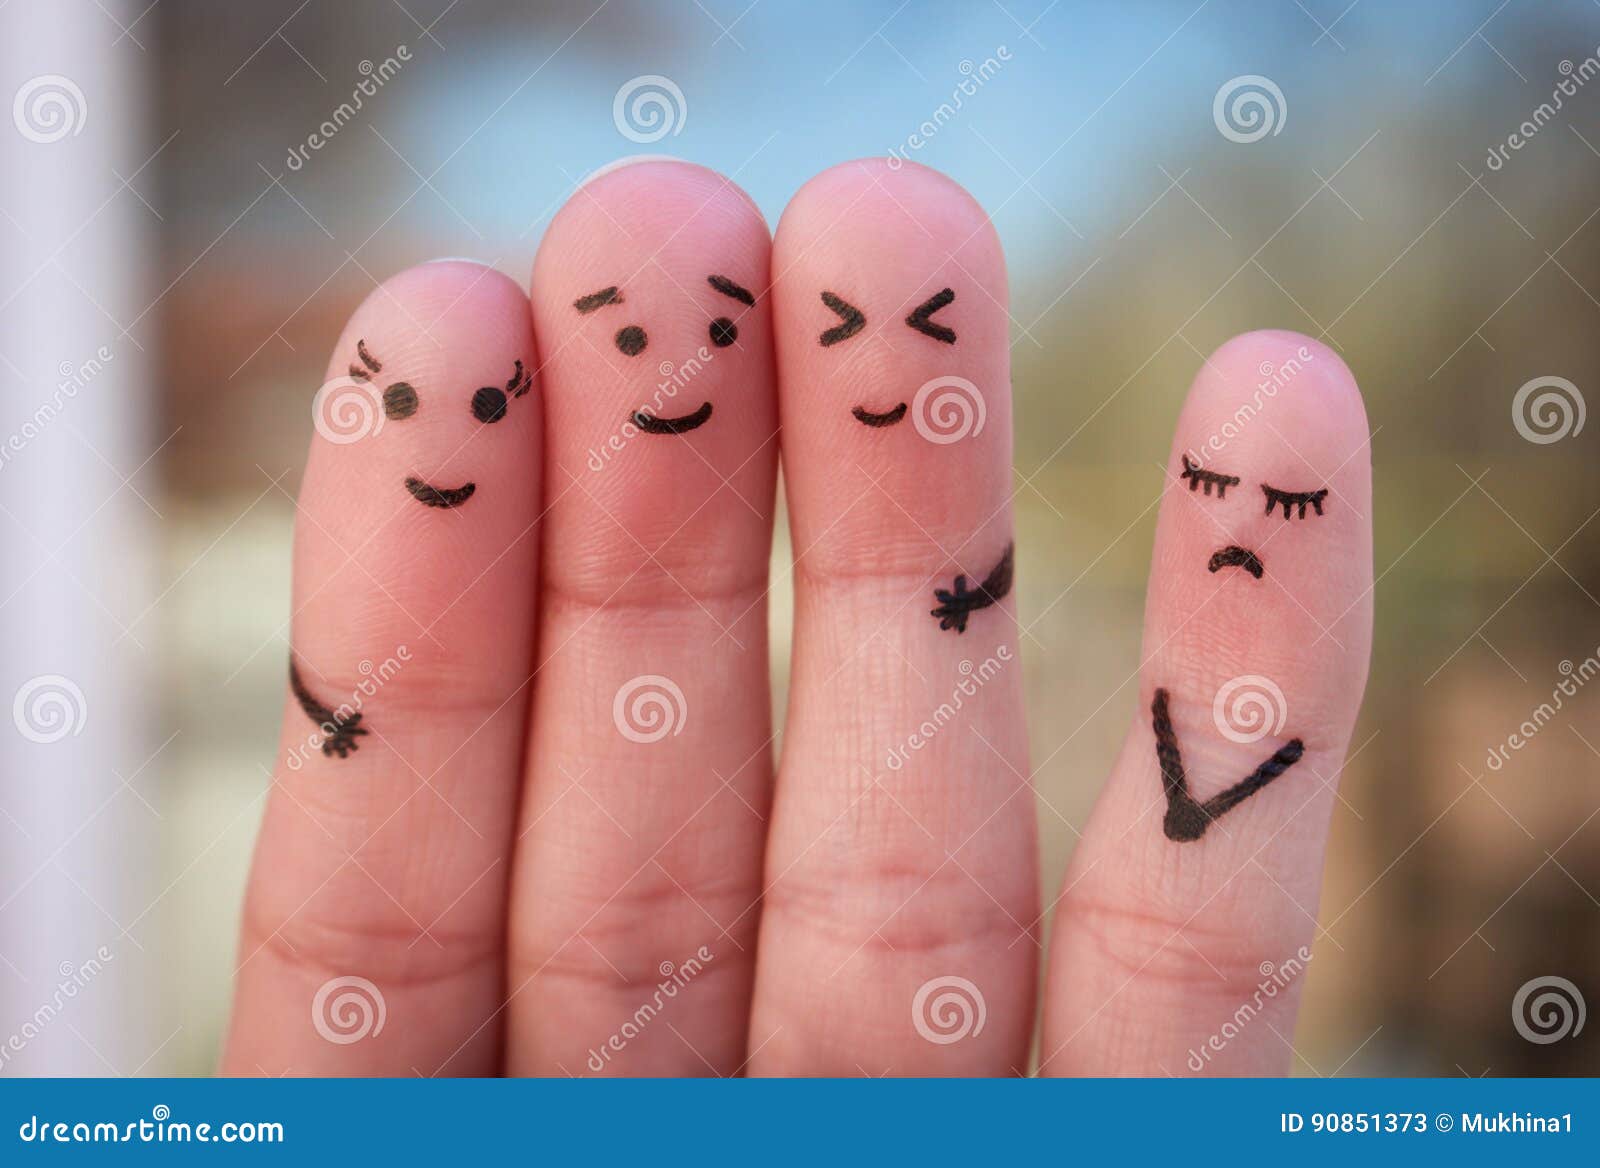 fingers art of people. loneliness, allocation from crowd.